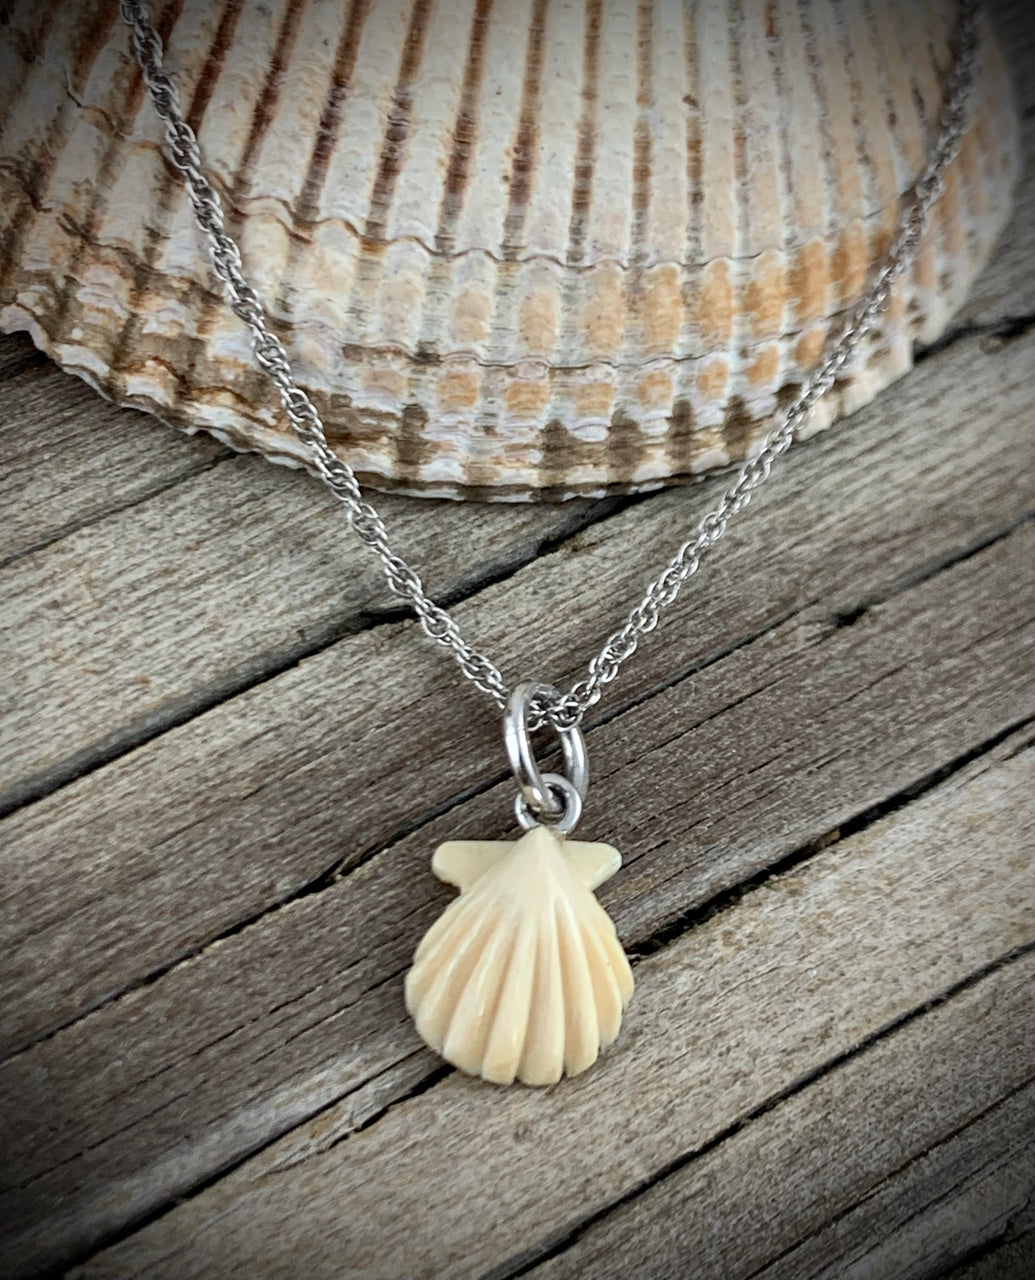 Woolly Mammoth Ivory Pendant - Clamshell